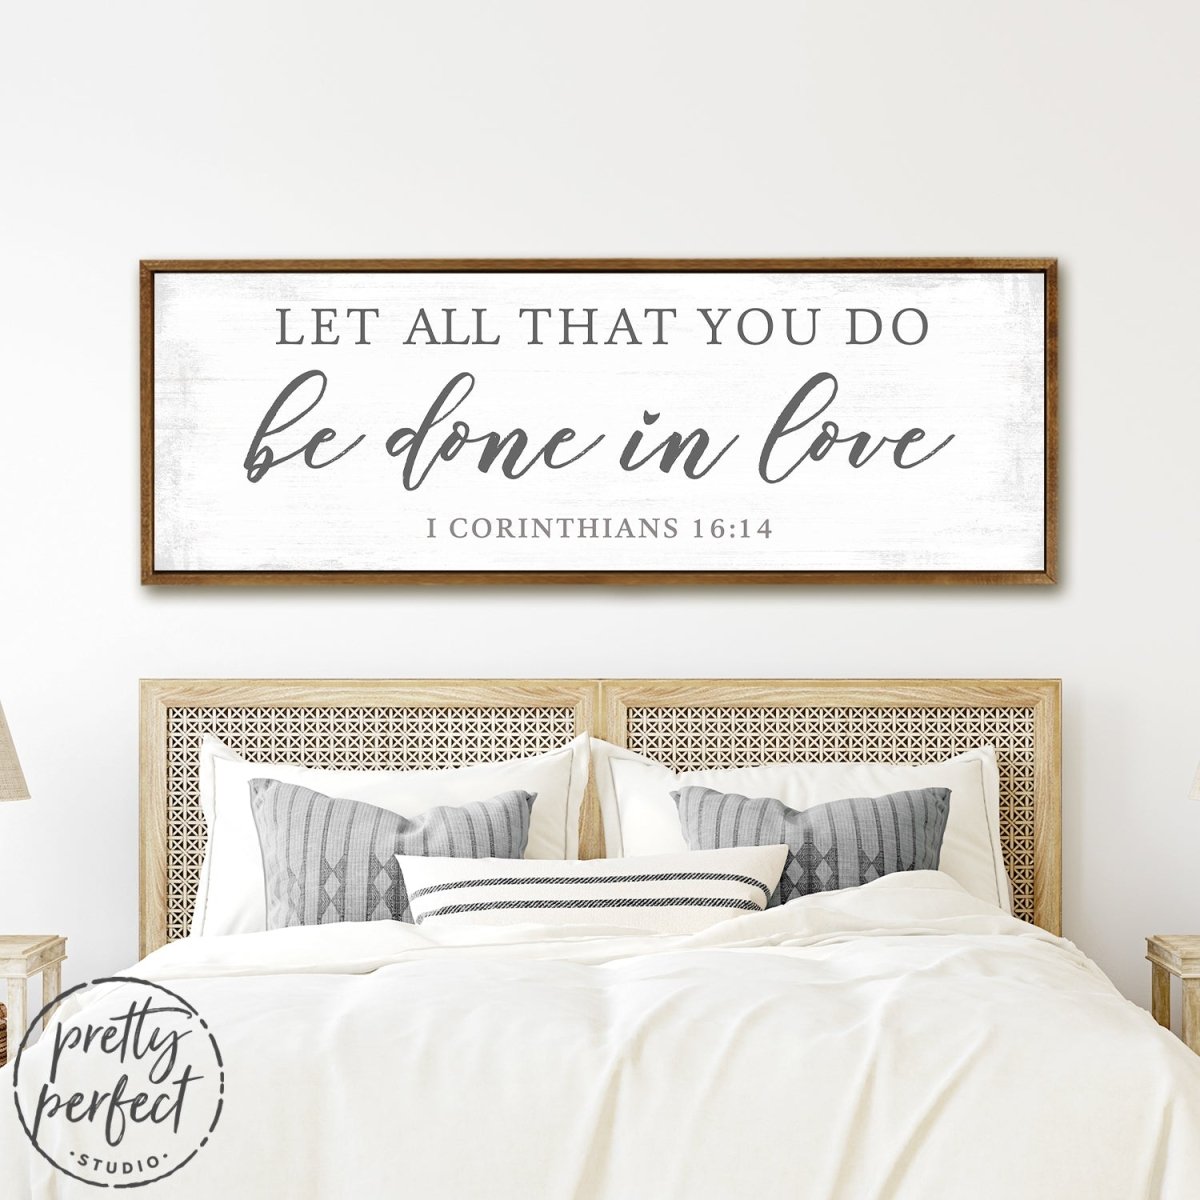 Let All That You Do Be Done In Love Sign in Bedroom - Pretty Perfect Studio